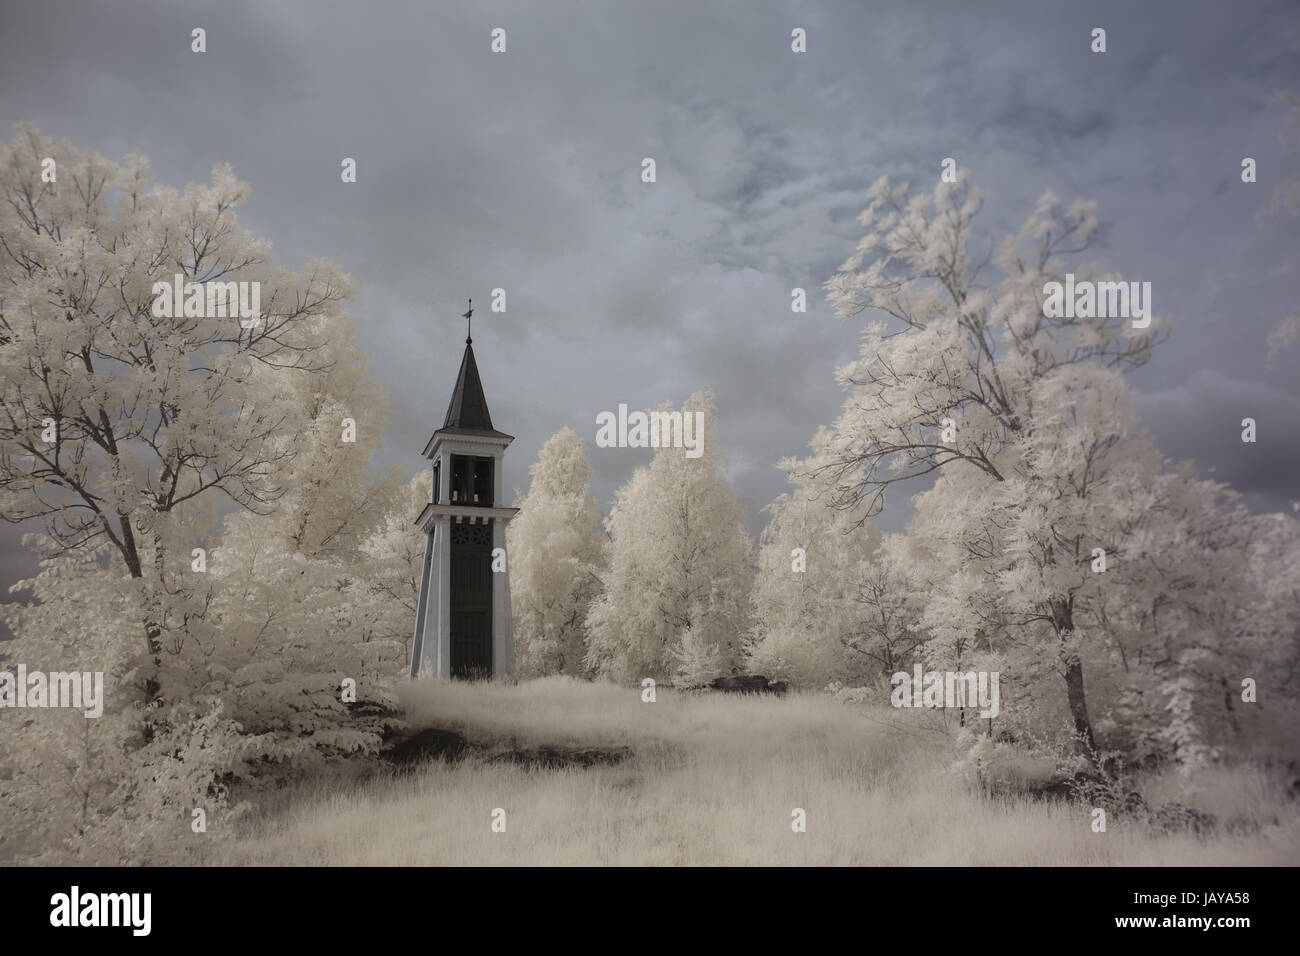 A very old wooden bell tower in Finspang, Sweden IR Stock Photo